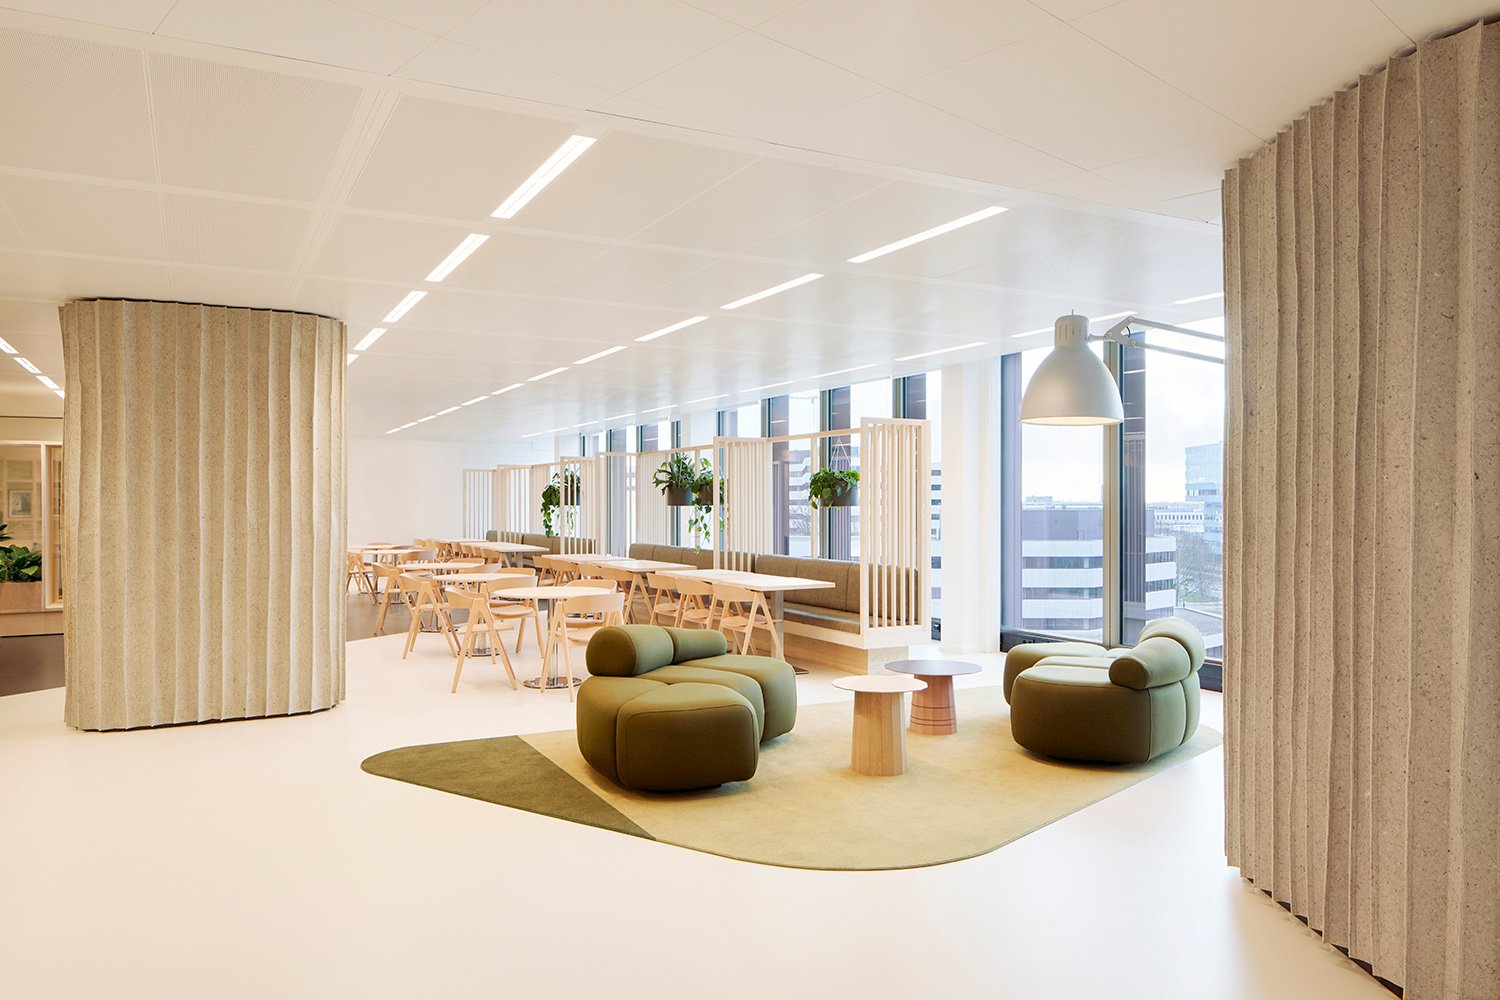  client: Phenster project: Bijenkorf HQ 